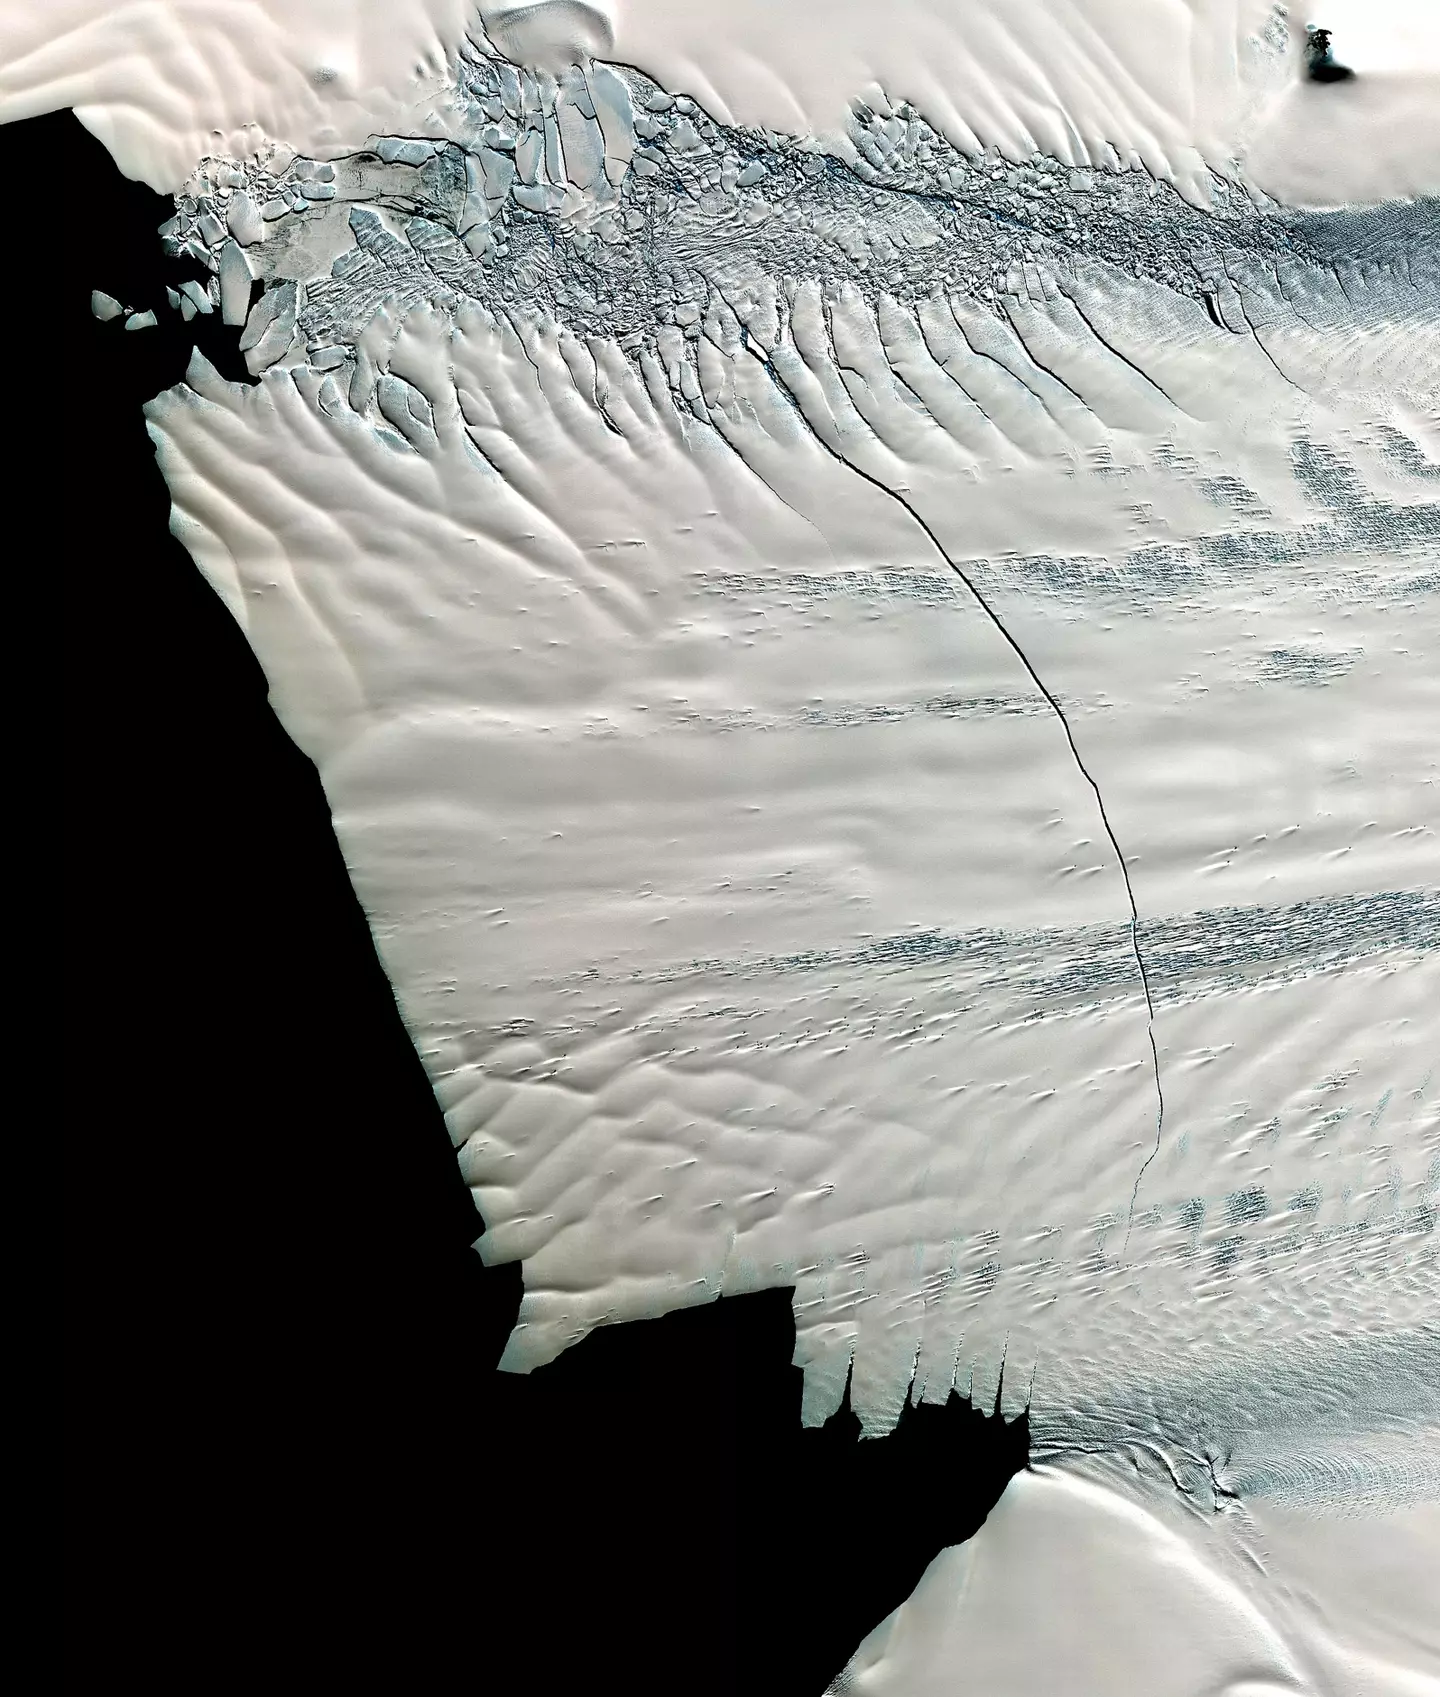 Photography from NASA has shown massive cracks appearing in the glacial ice.